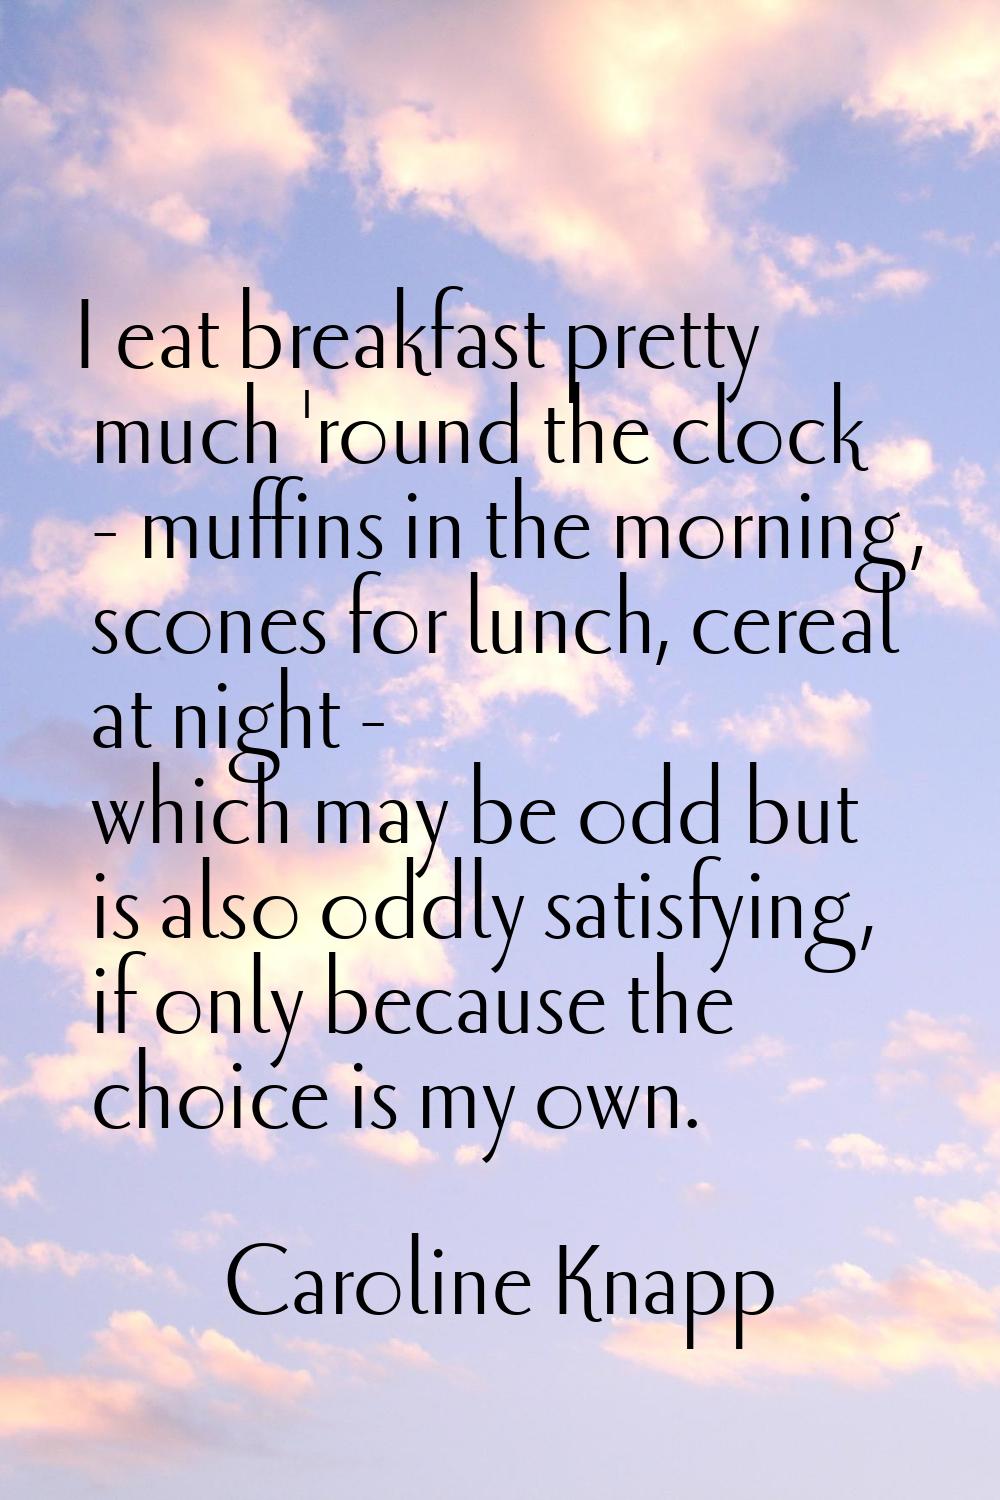 I eat breakfast pretty much 'round the clock - muffins in the morning, scones for lunch, cereal at 